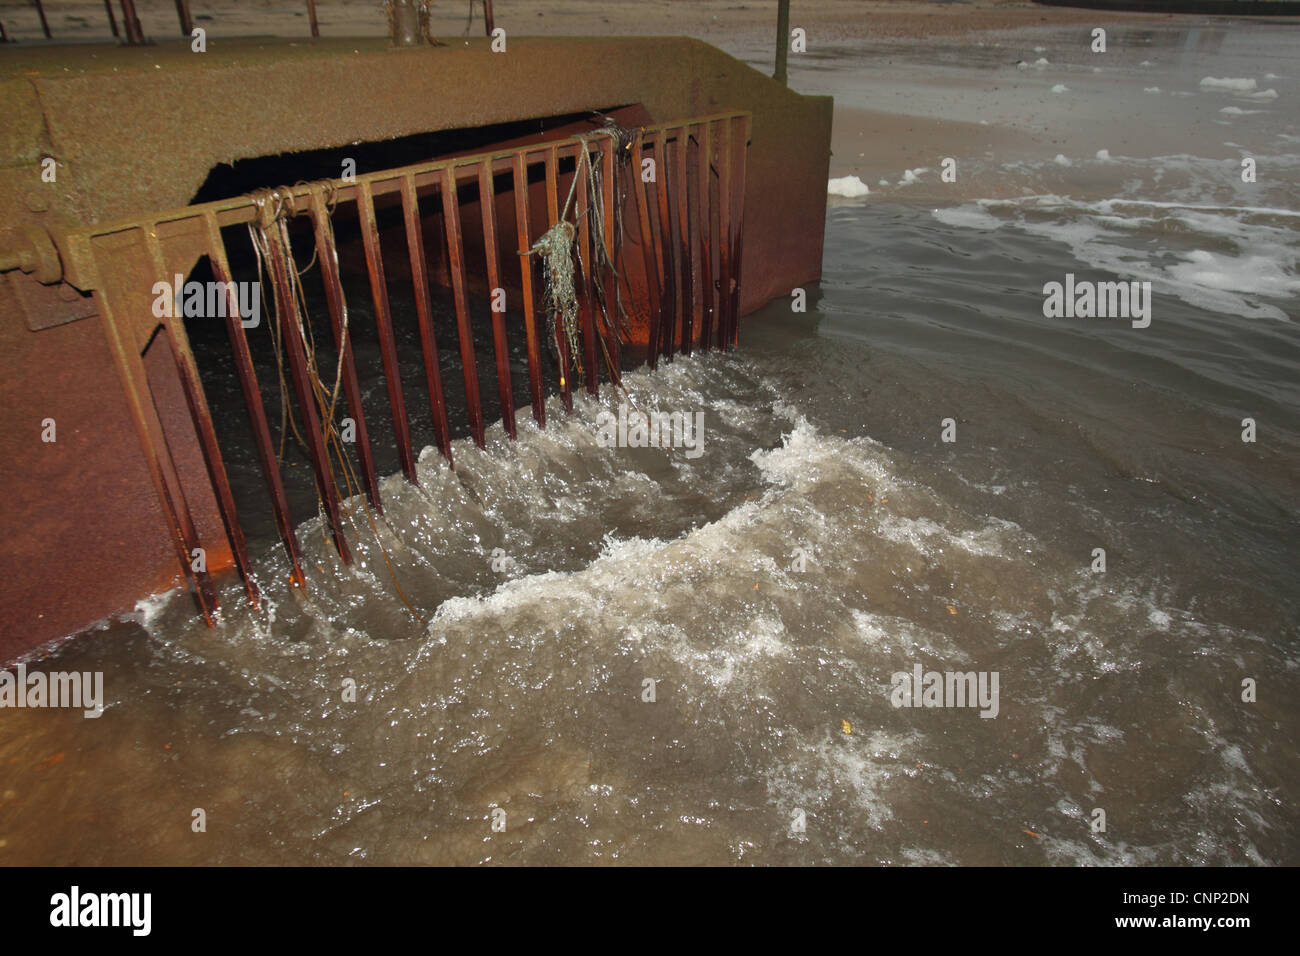 Combined sewer overflow (CSO), sanitary sewage and stormwater runoff discharged onto beach, Boscombe, Dorset, England, october Stock Photo